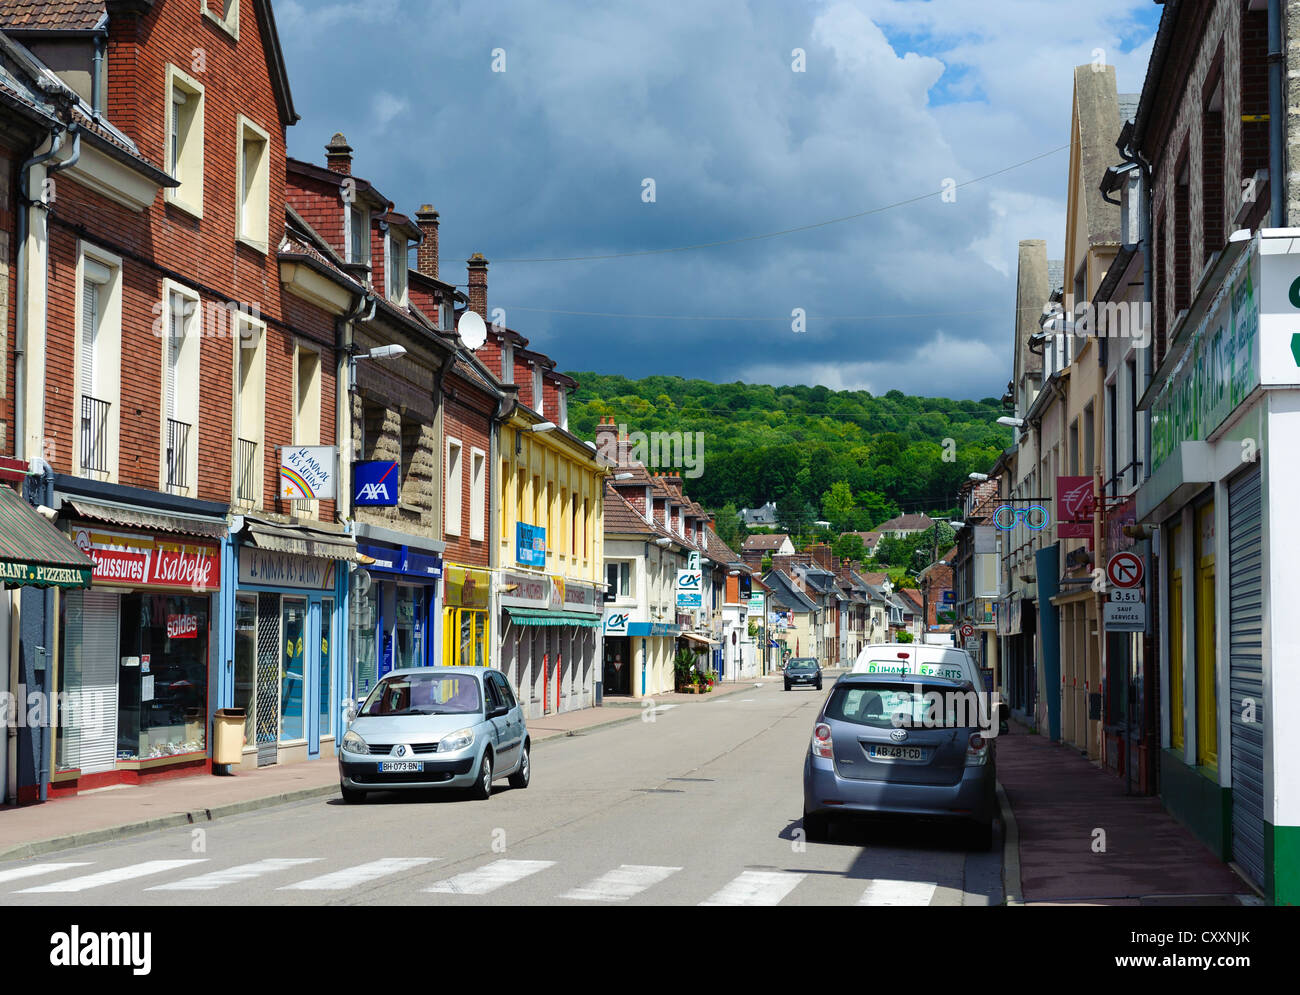 The main street in the town of Blangy-sur-Bresle, Haute-Normandie, France Stock Photo